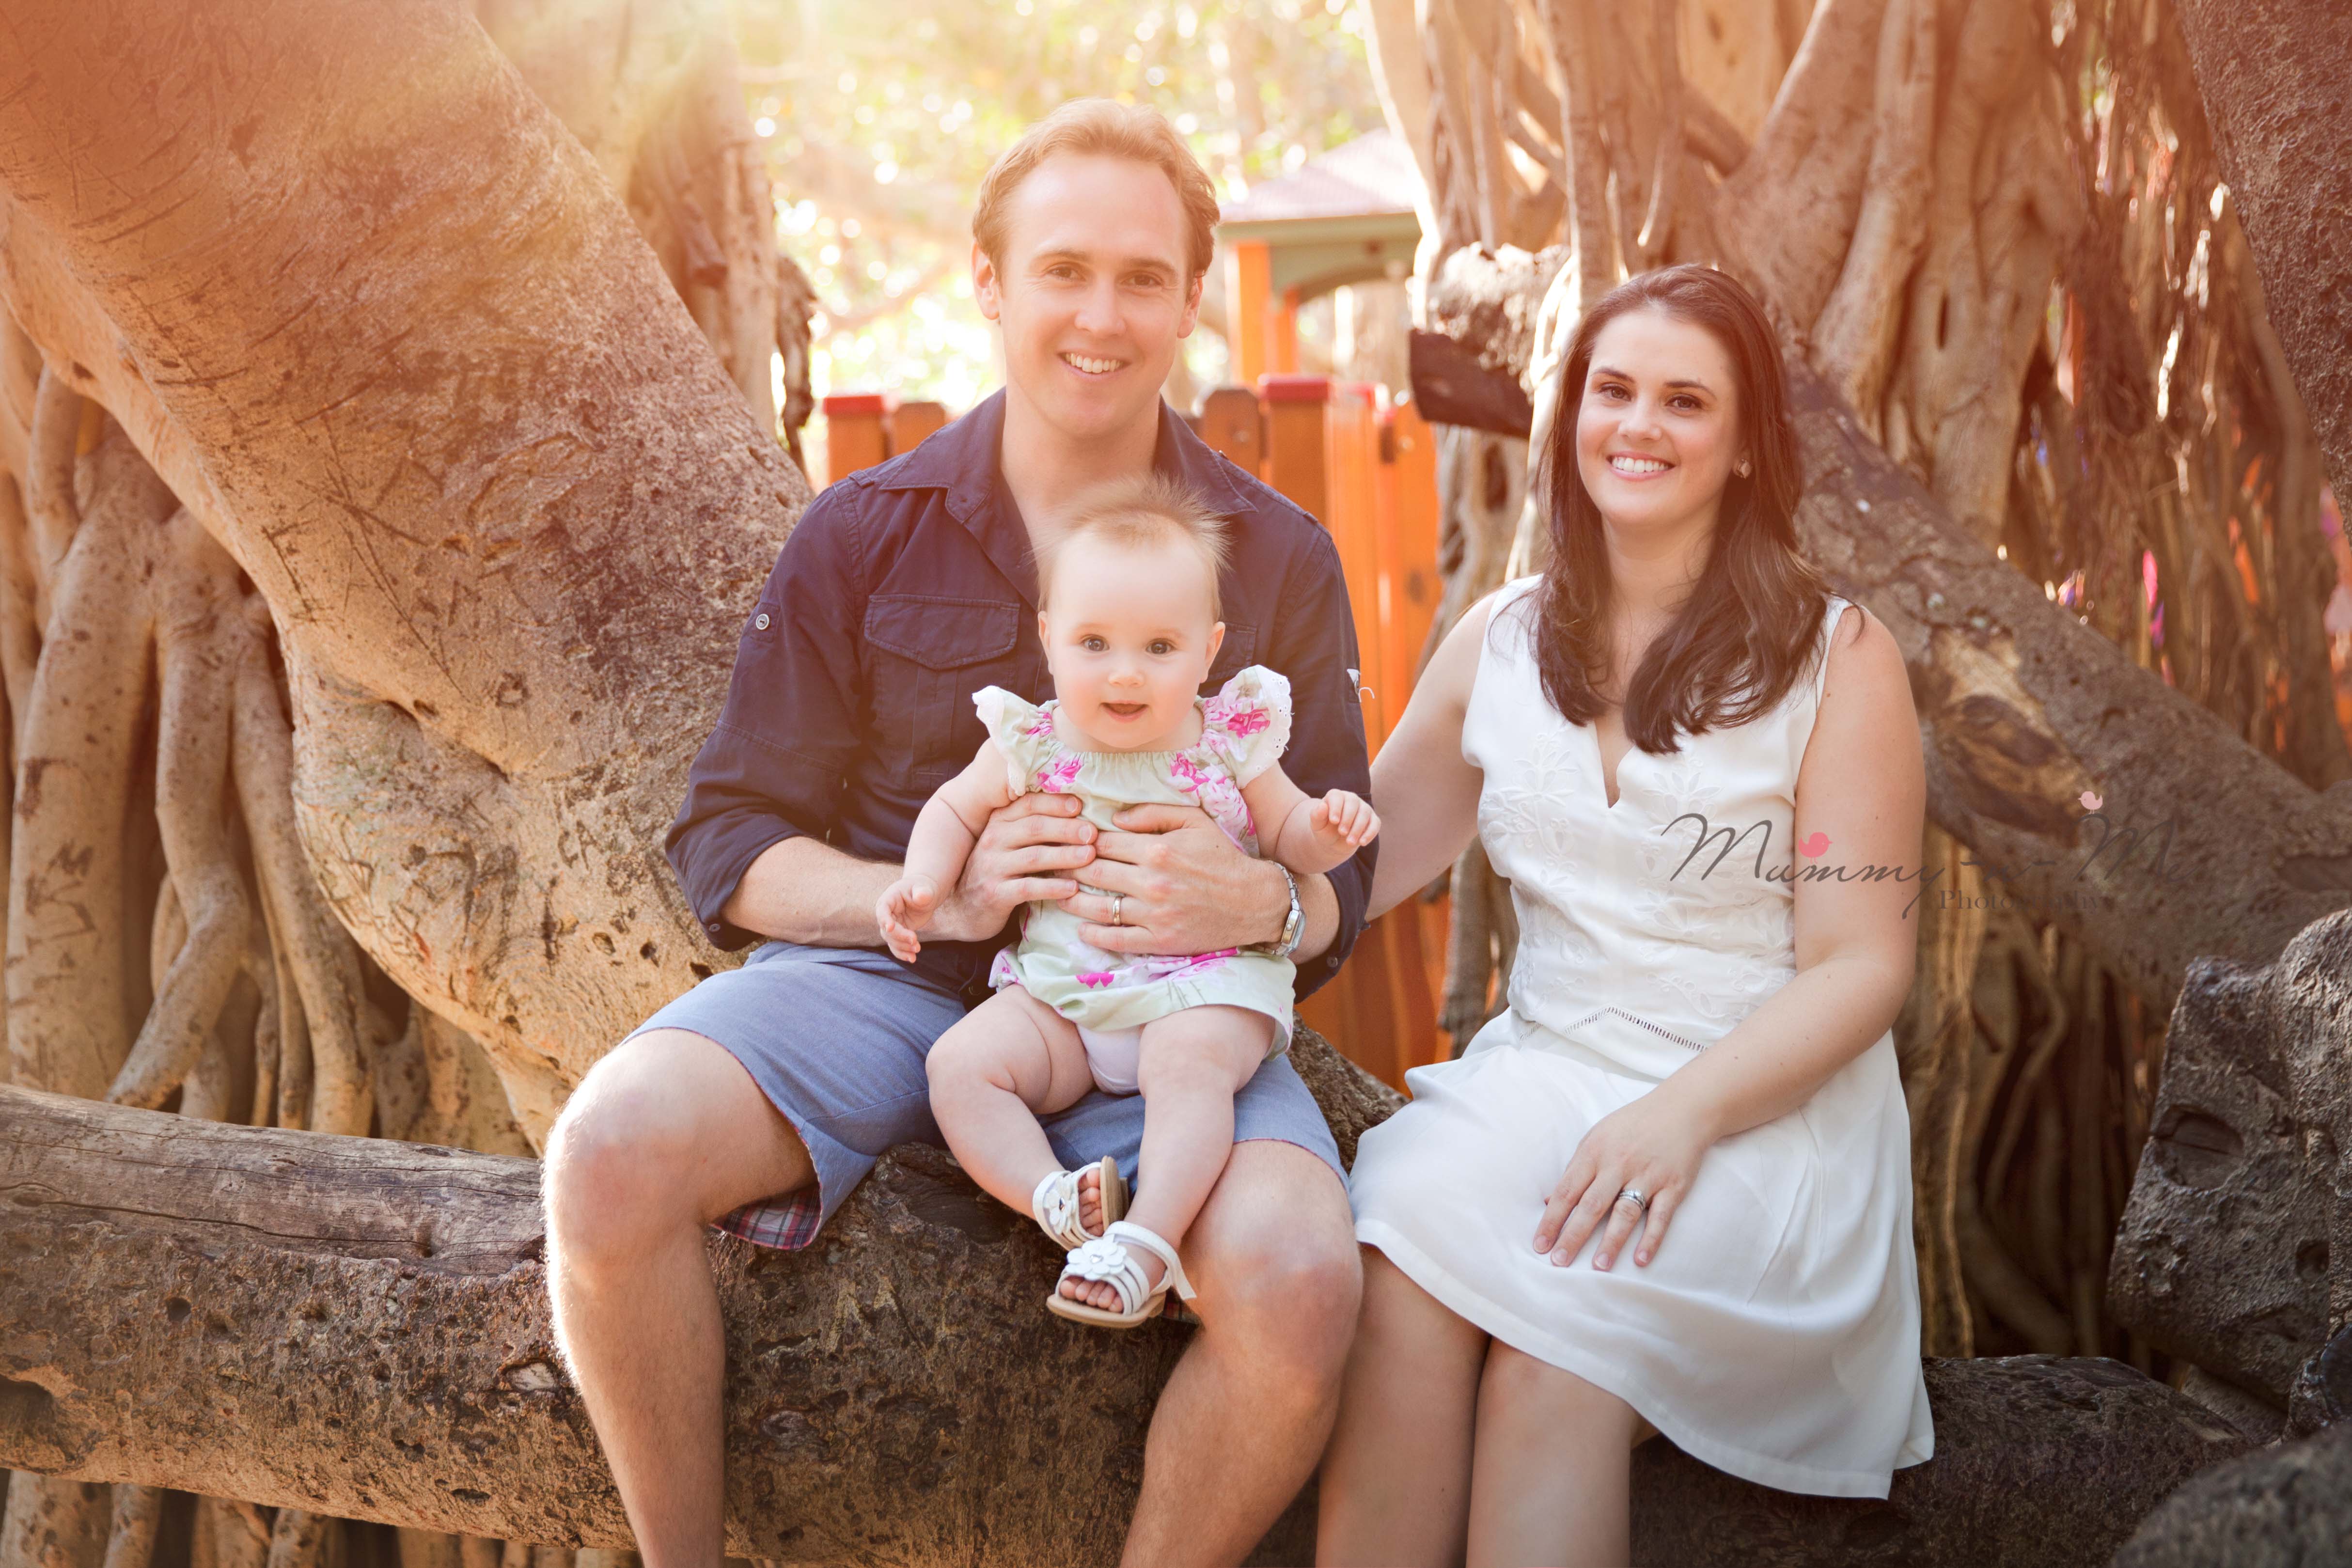 6 month girl with family at park Brisbane baby photographer